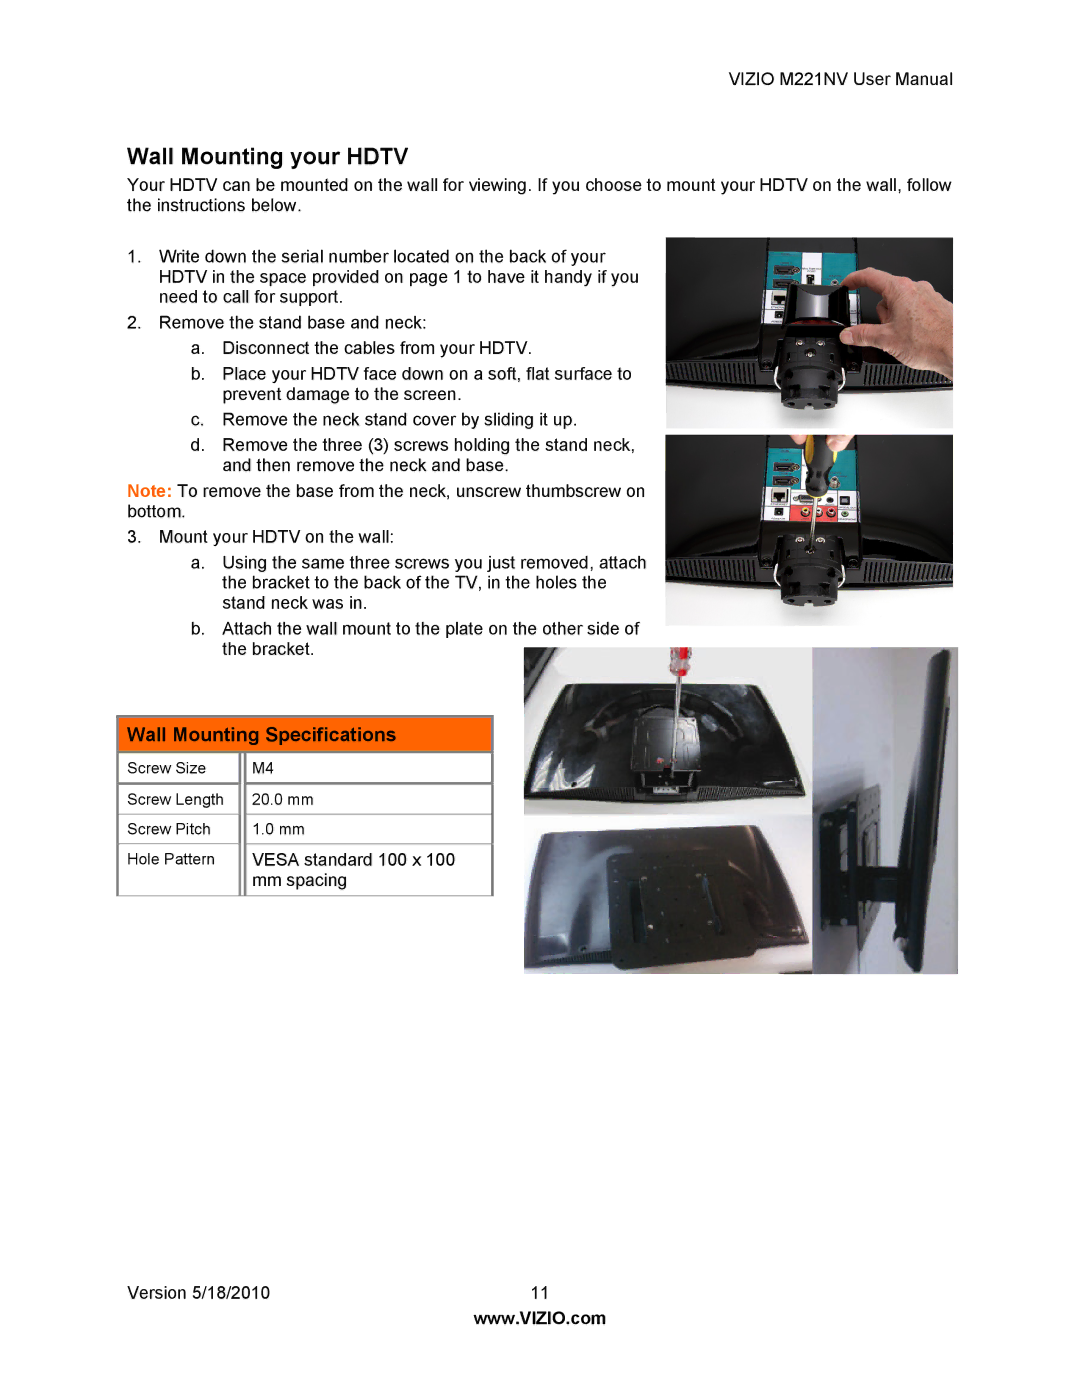 Vizio M221NV user manual Wall Mounting your Hdtv, Wall Mounting Specifications 